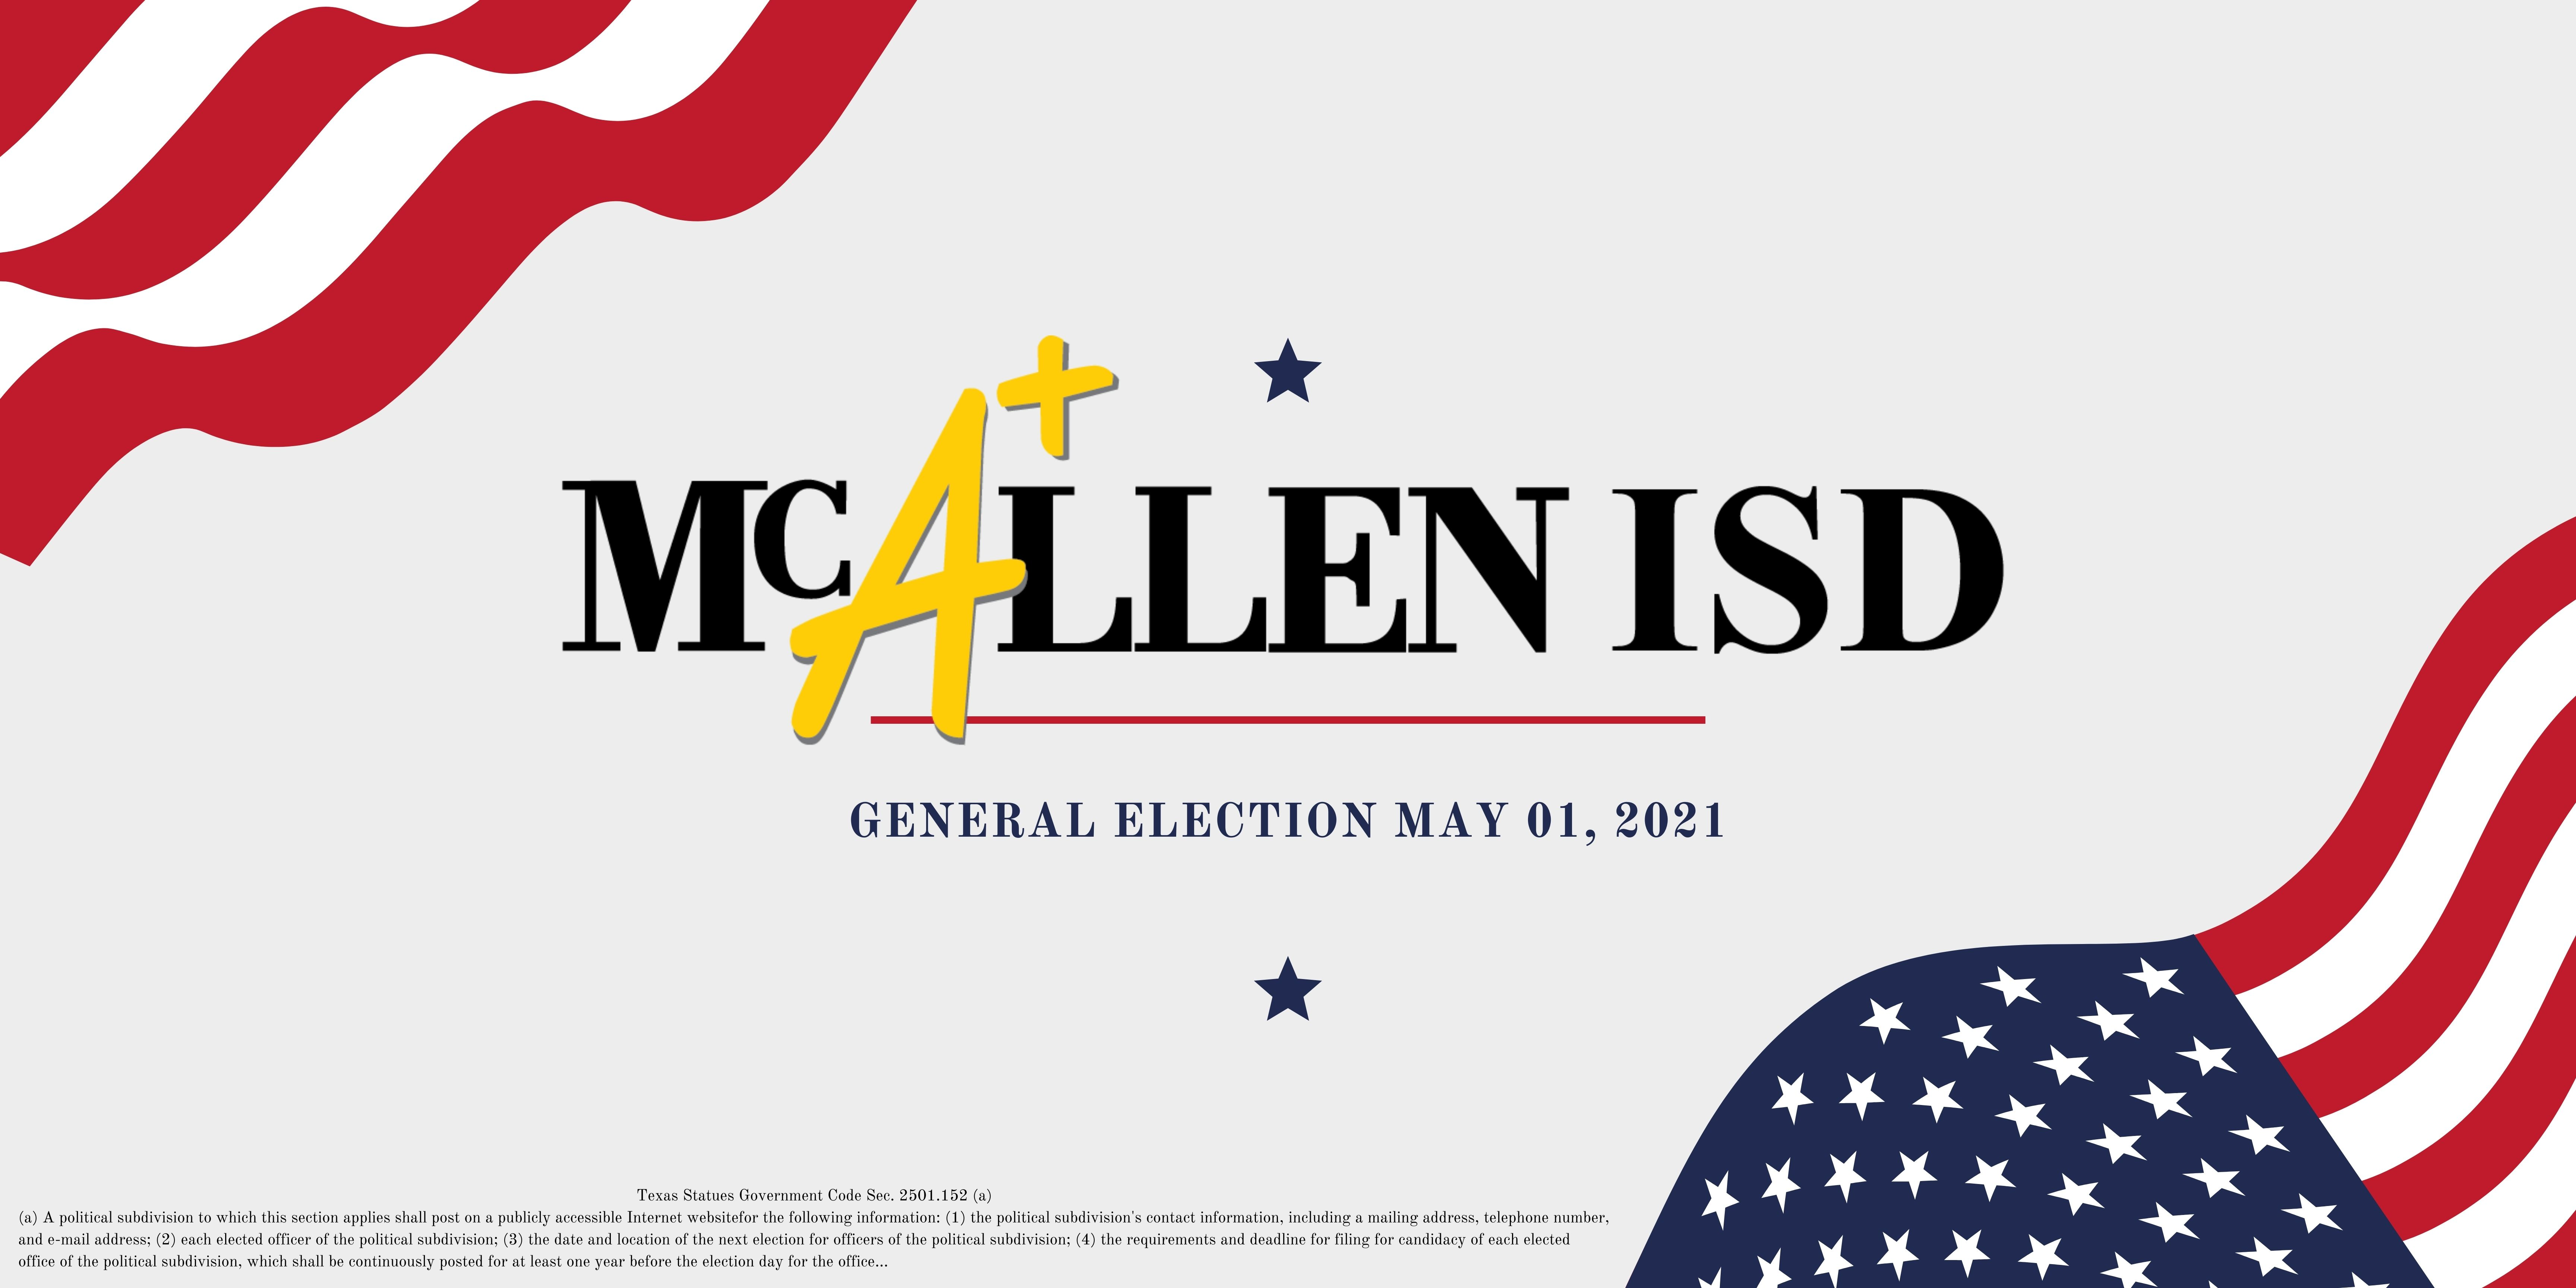 McAllen ISD General Election May 01, 2021 Photo